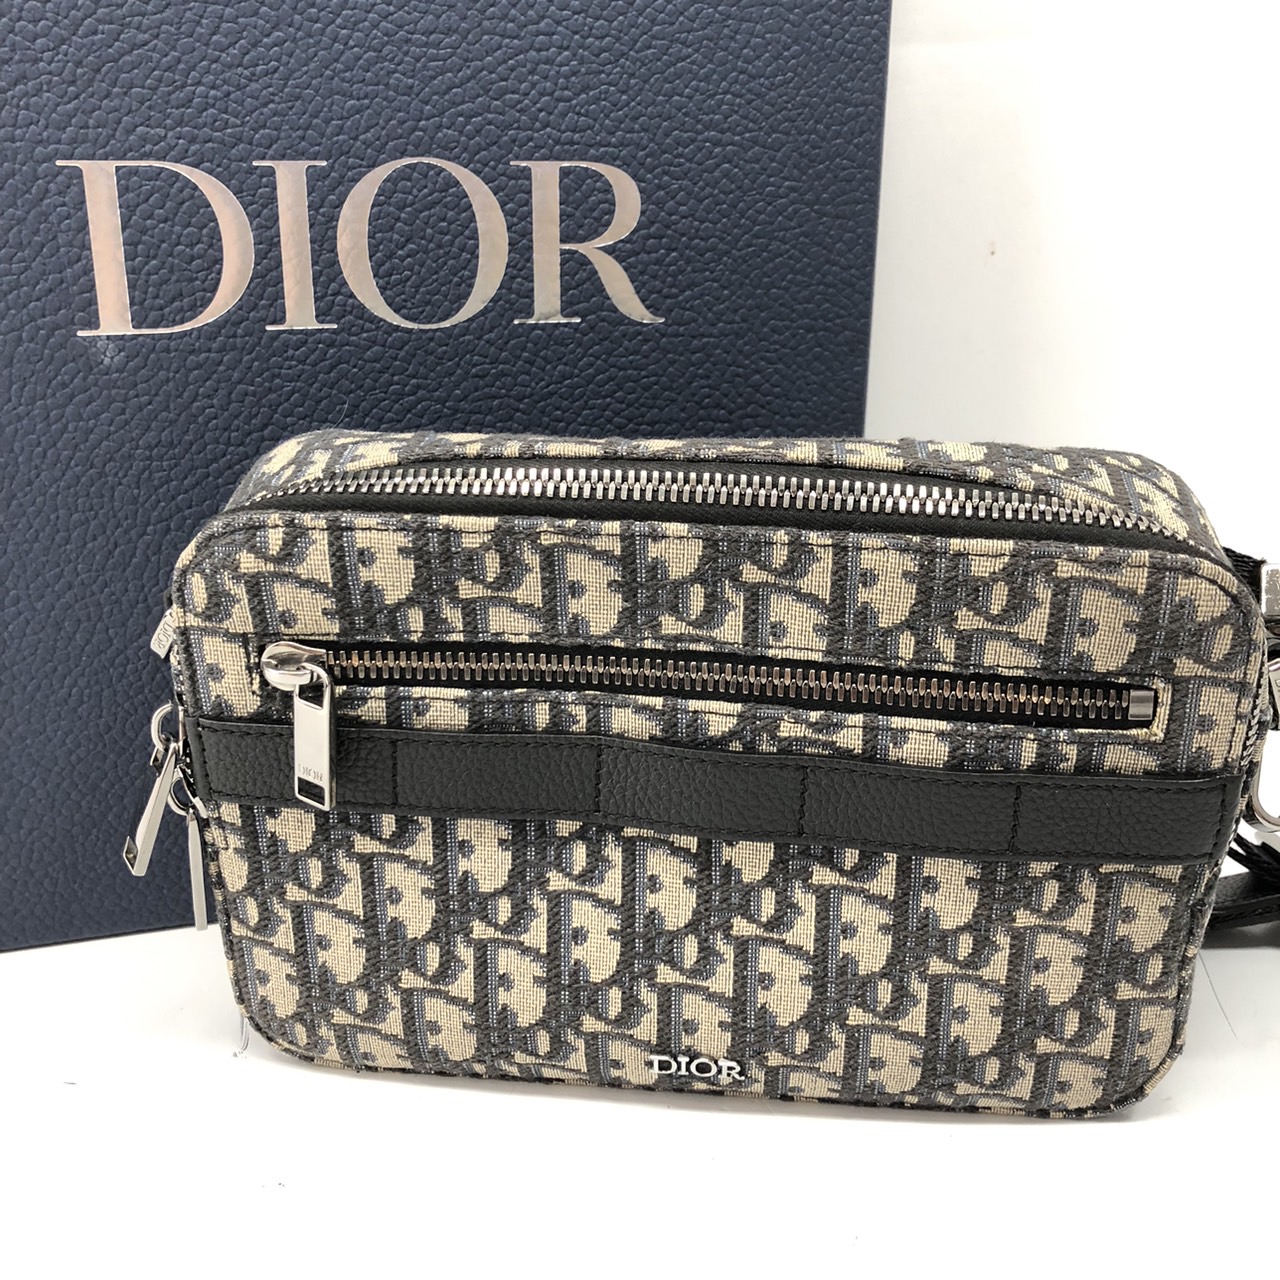 You are currently viewing Christian Dior Bag